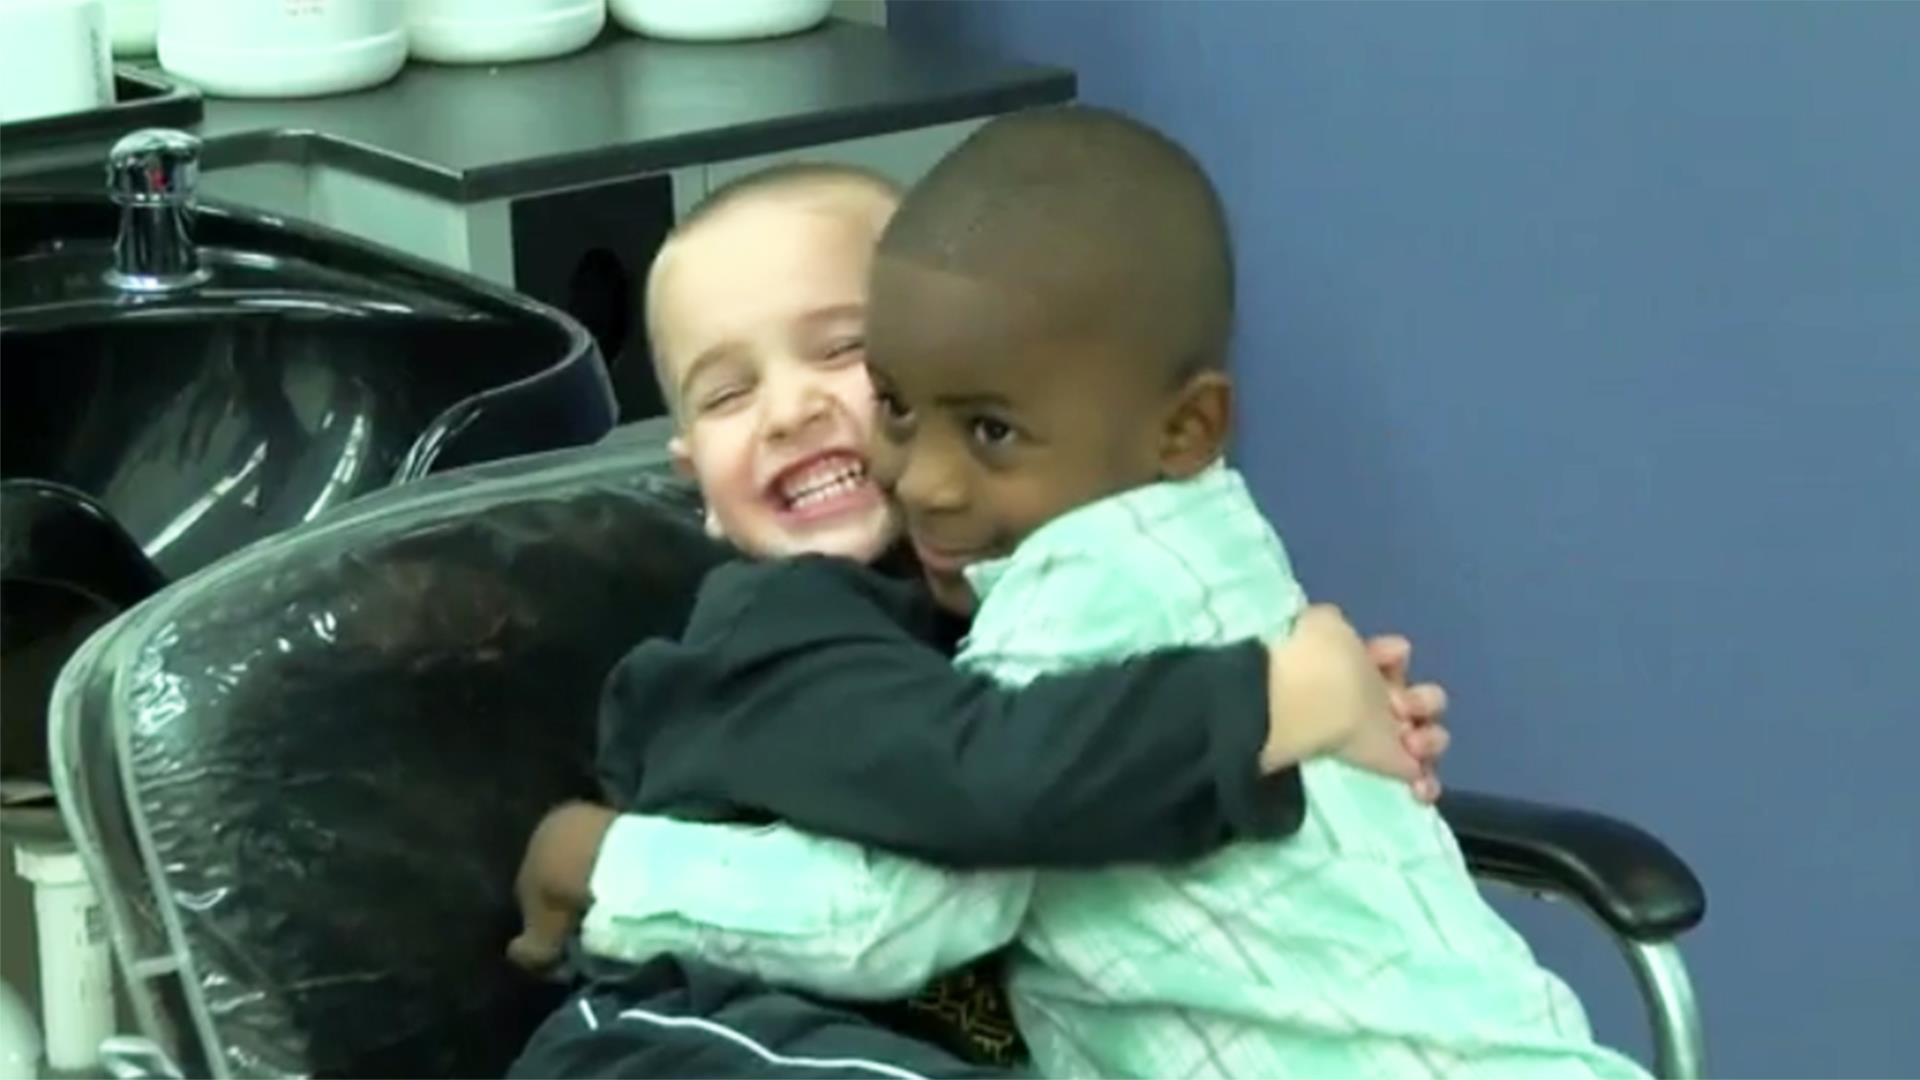 Watch two boys get sweet matching haircuts to trick their teacher